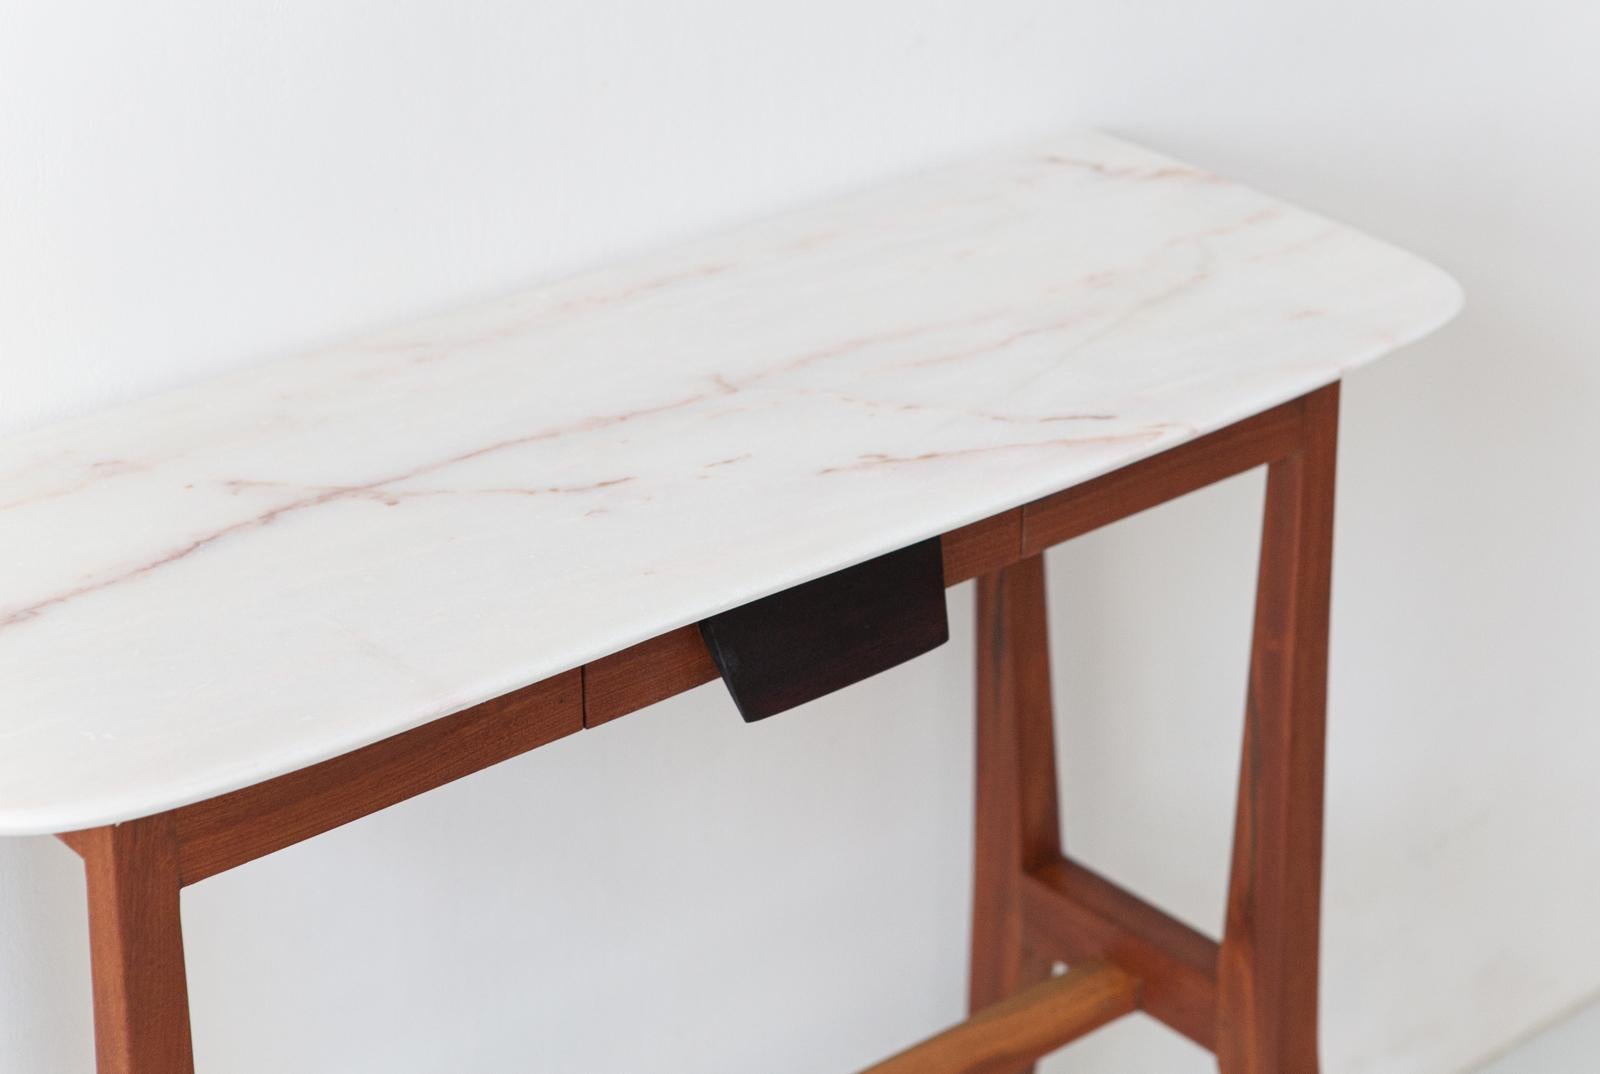 Console table with marble top, manufactured in Italy during the 1950s

Elegant and light design

Completely restored, sanding of the original finish and new light finish with shellac

It can by use as little desk table.